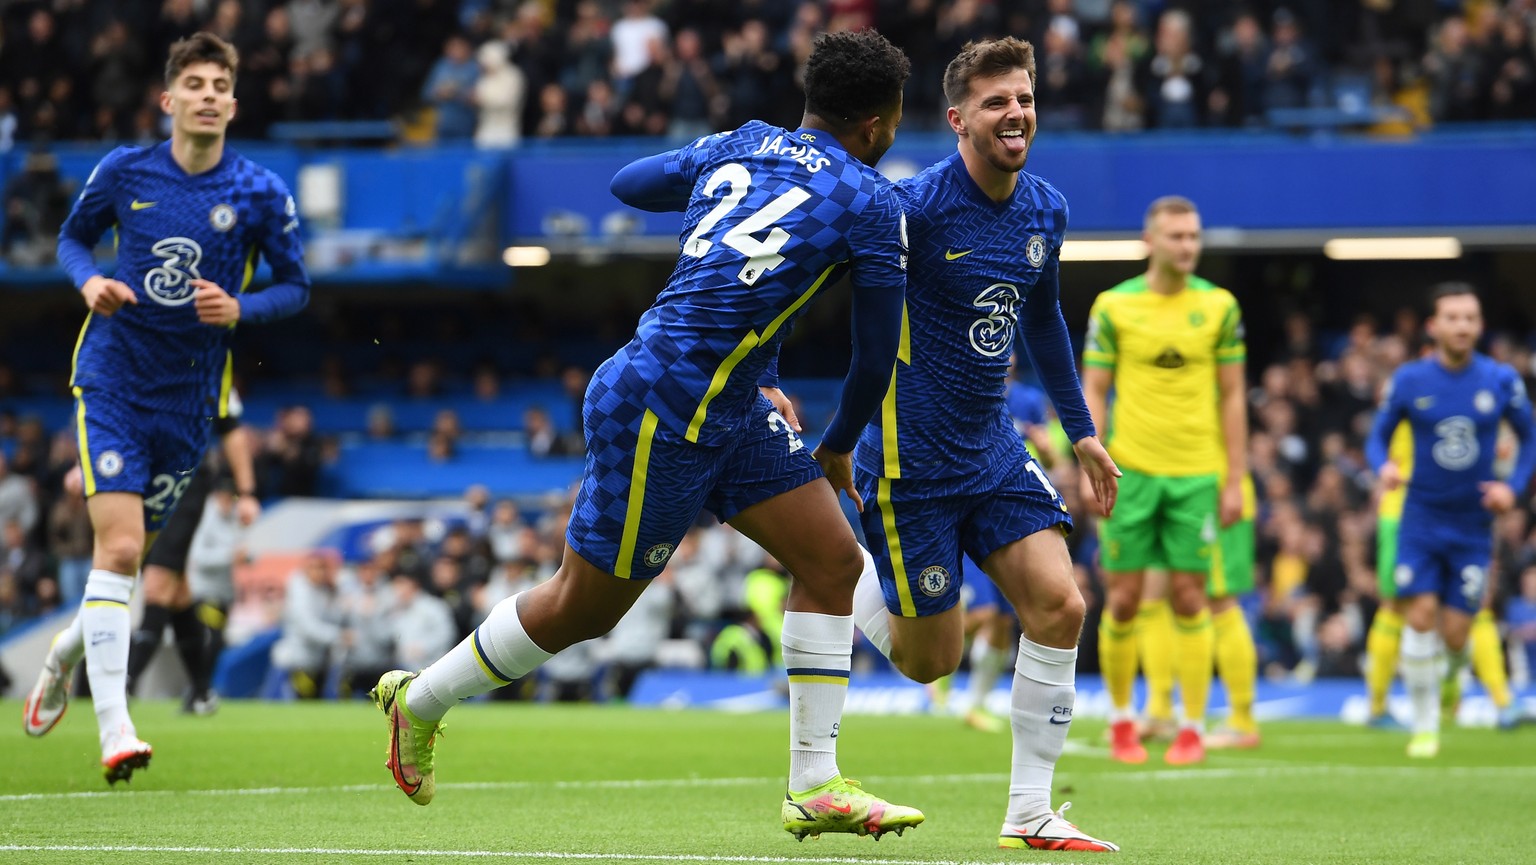 epa09540979 Mason Mount (R) of Chelsea celebrates after scoring the opening goal during the English Premier League soccer match between Chelsea and Norwich City in London, Britain, 23 October 2021. EP ...